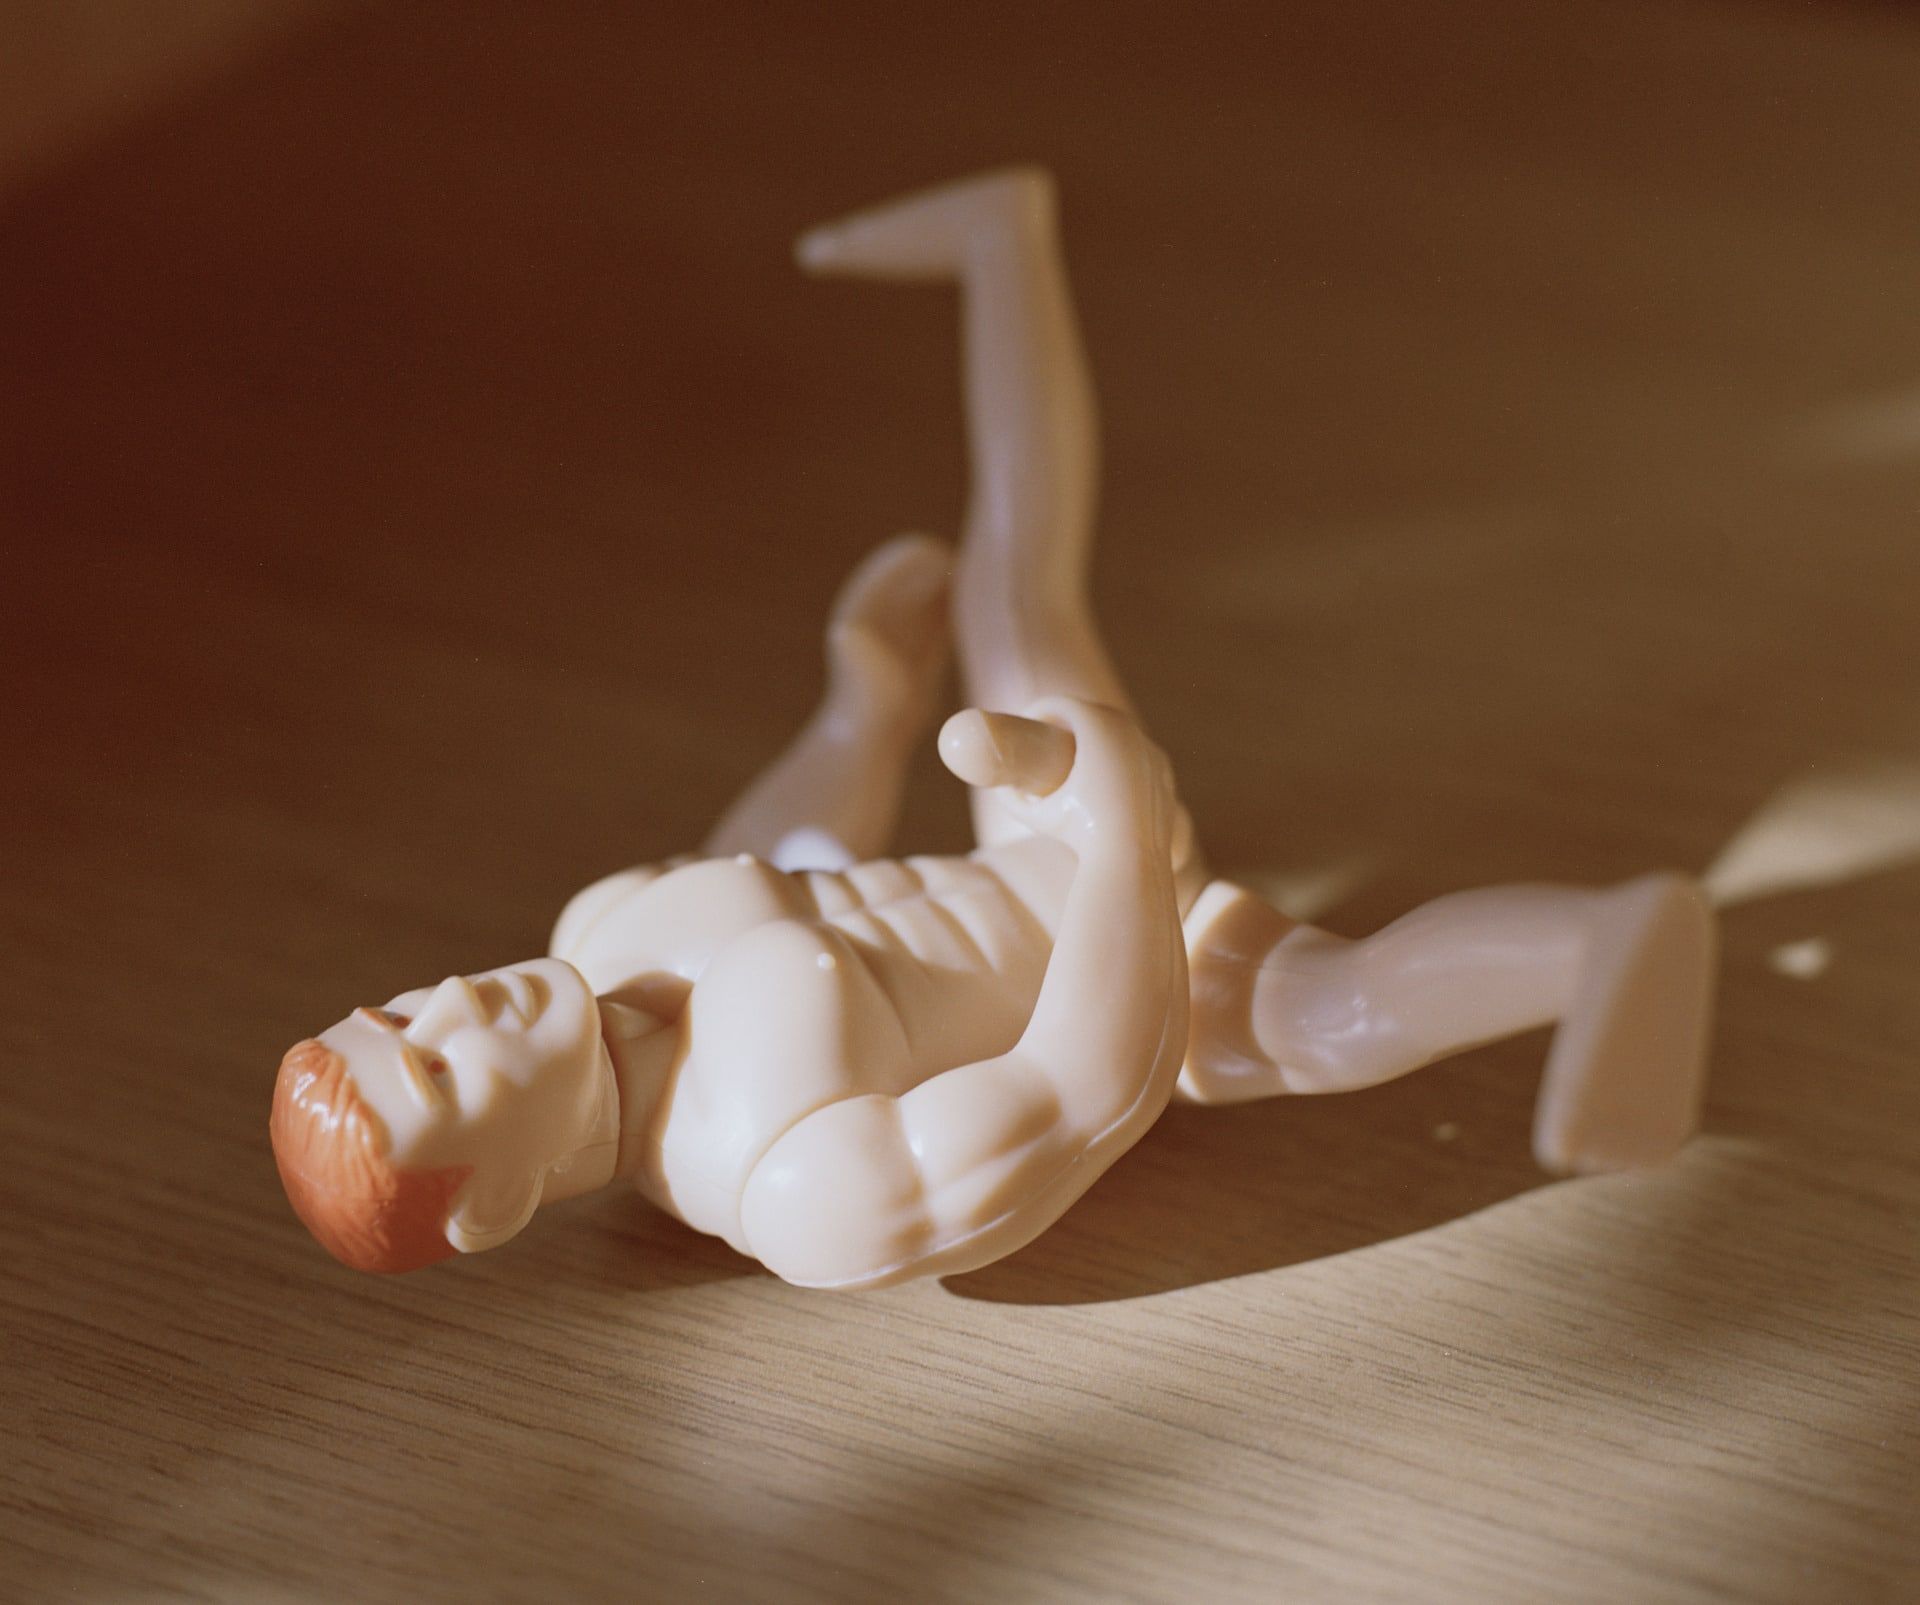 A photo of a small plastic muscle man toy holding it's penis laid on it's back on a wooden table